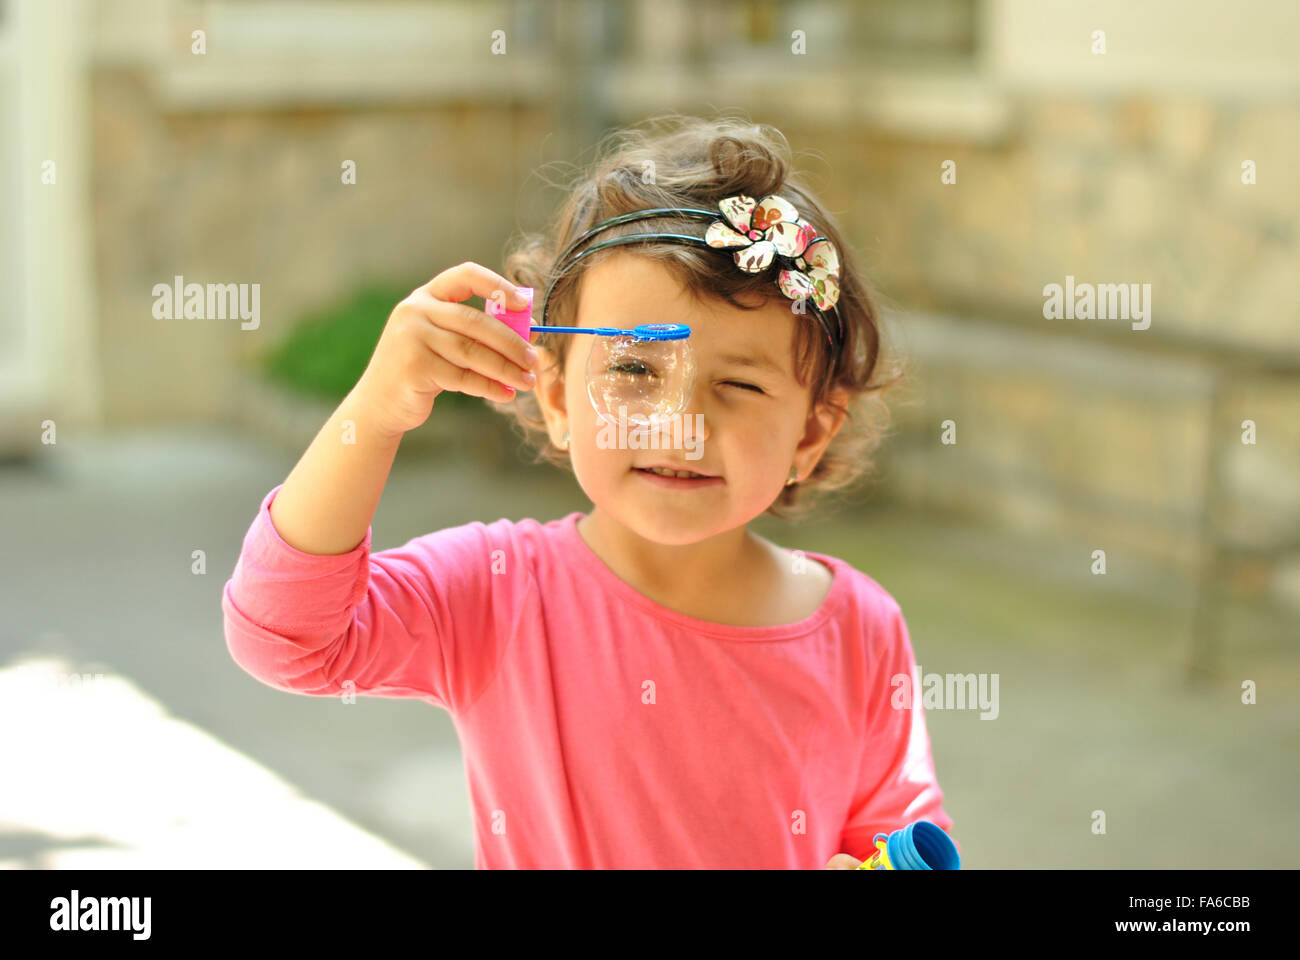 Girl holding a soap bubble wand Stock Photo